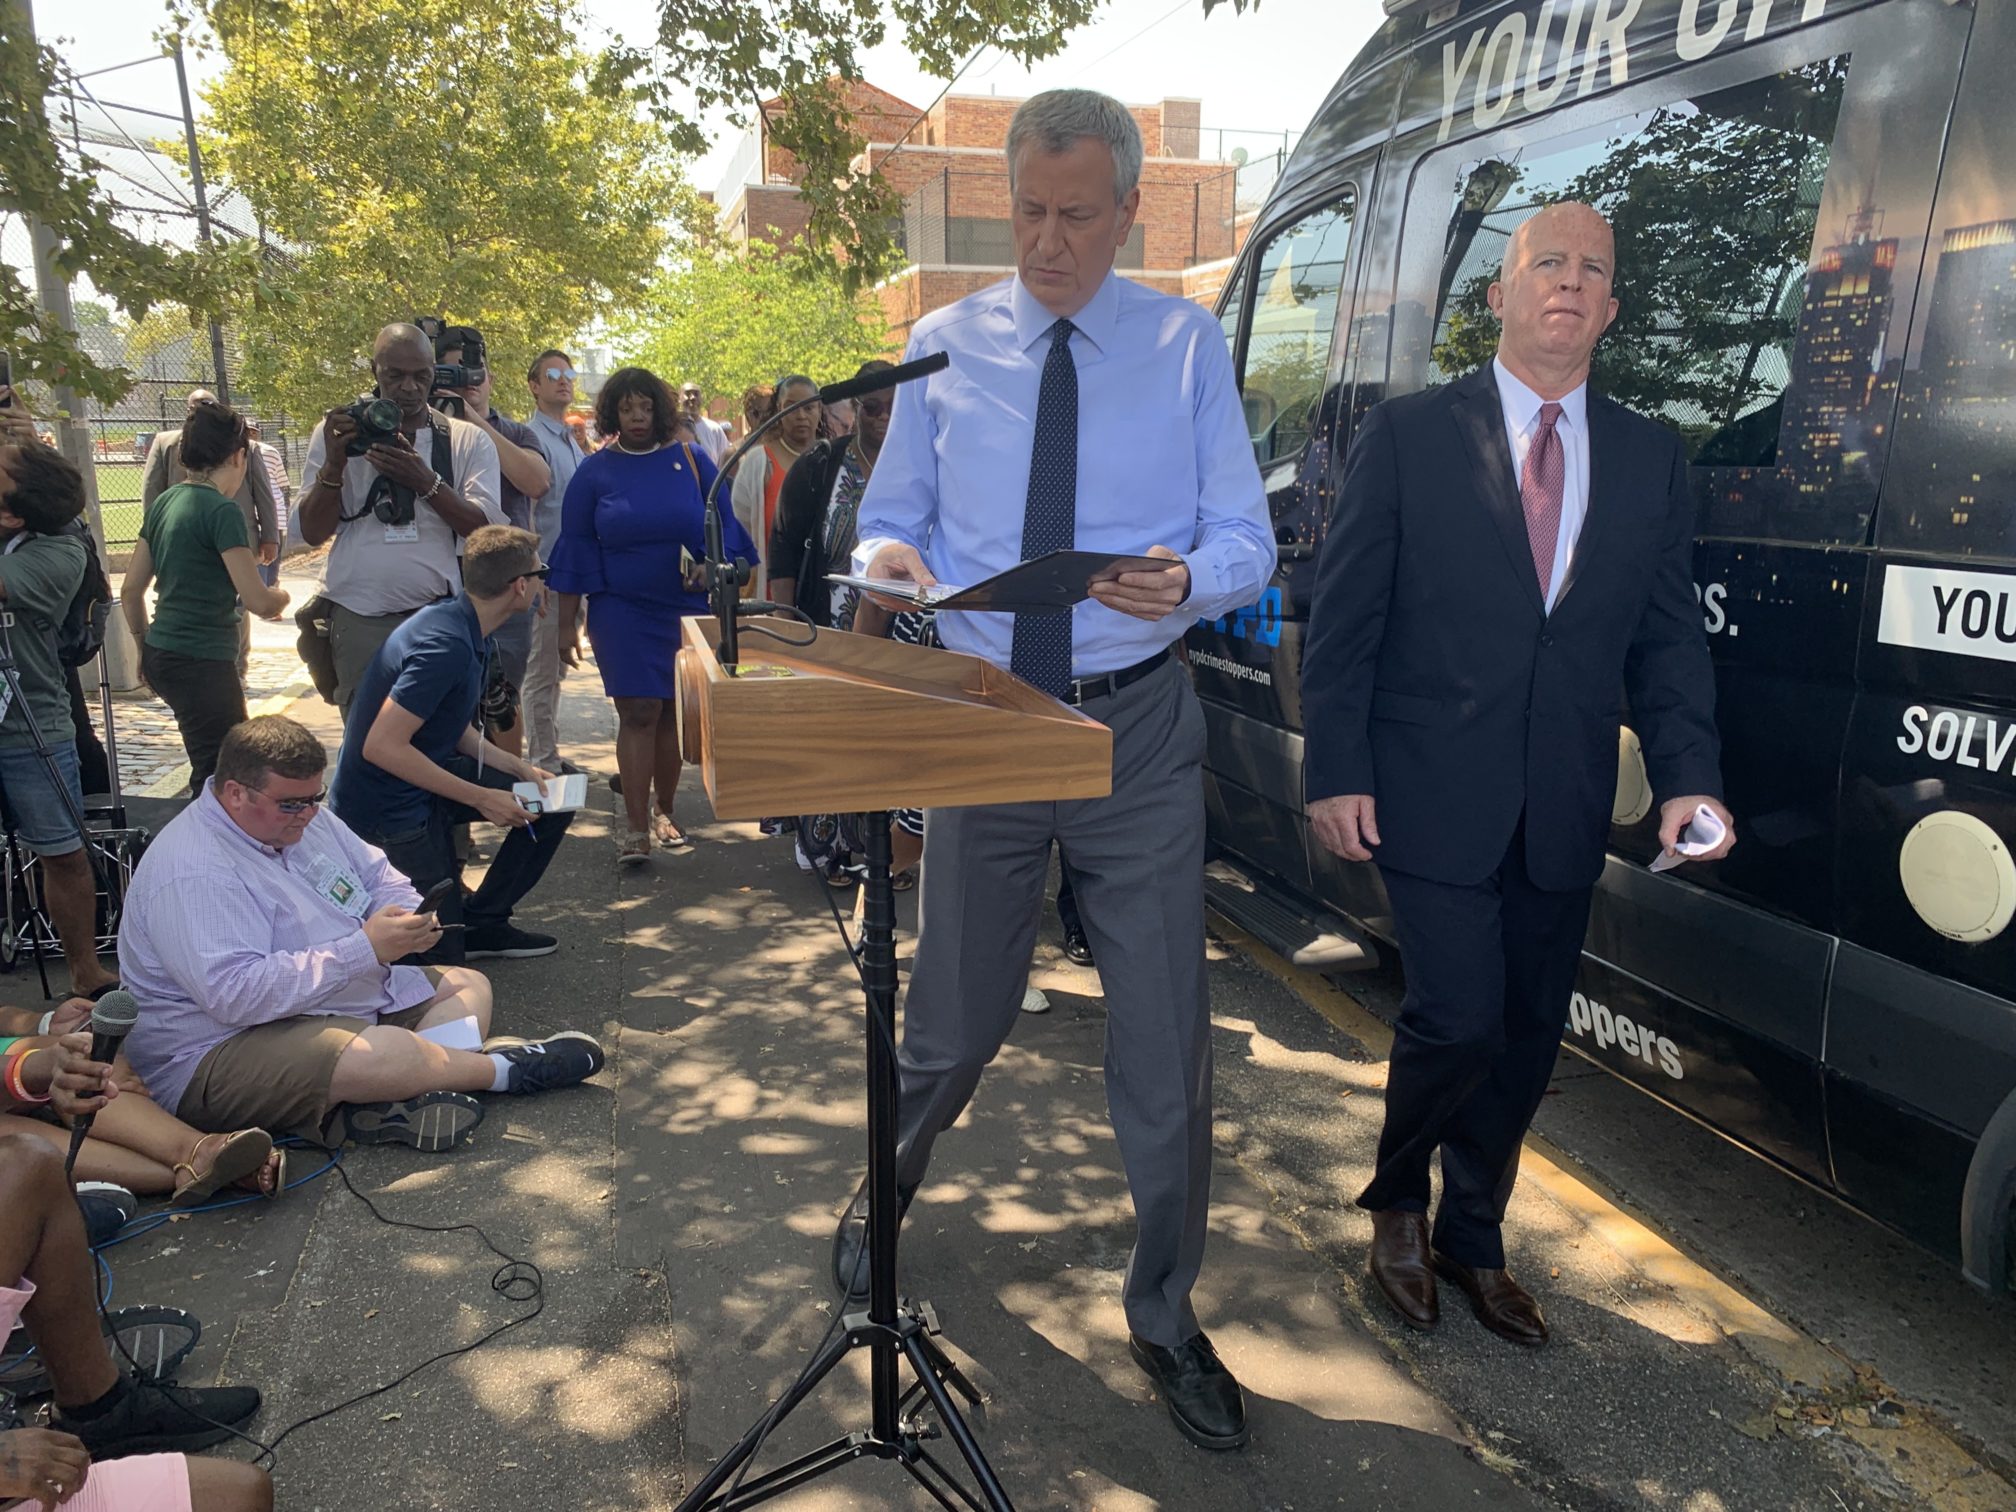 Mayor Bill de Blasio (left) and NYPD Commissioner James P. O'Neill (right) arrive July 28, 2019 to address reporters after a mass shooting in Brownsville. Eagle photo by Noah Goldberg